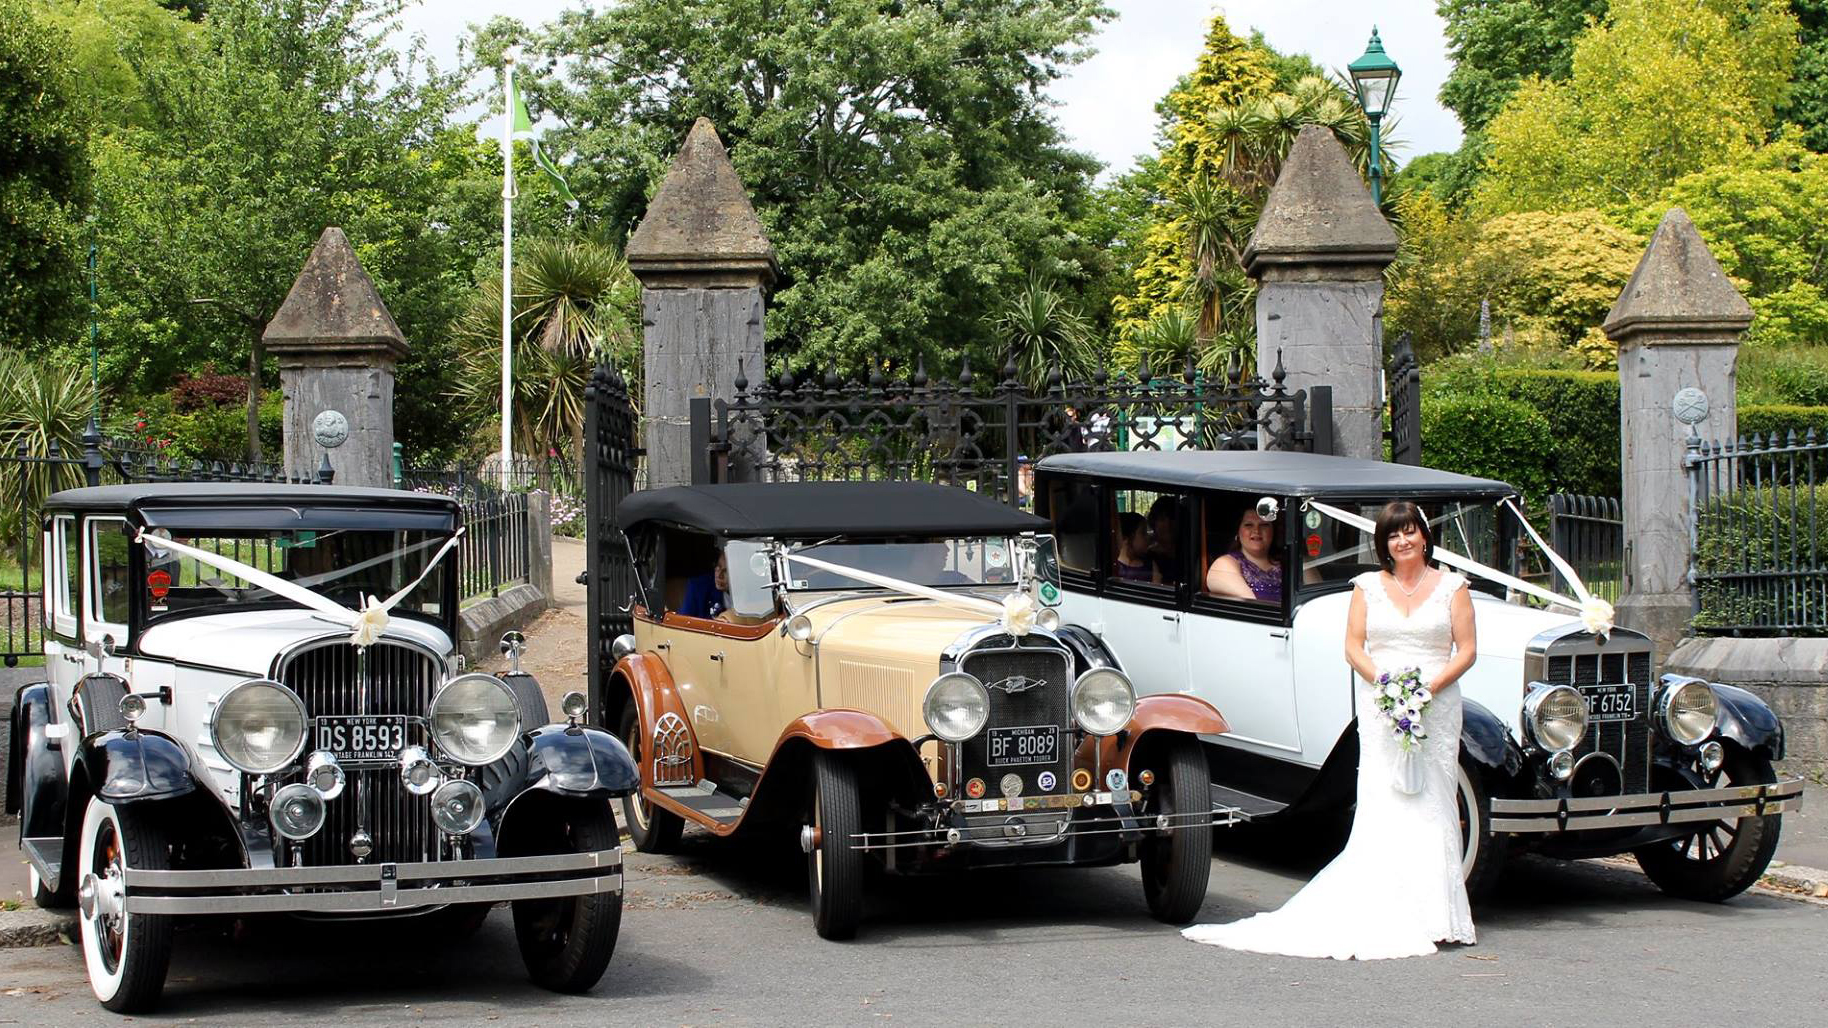 Two vintage wedding cars decorated with white ribbons at a local Launceston wedding. Both vehicles are parked side-by-side